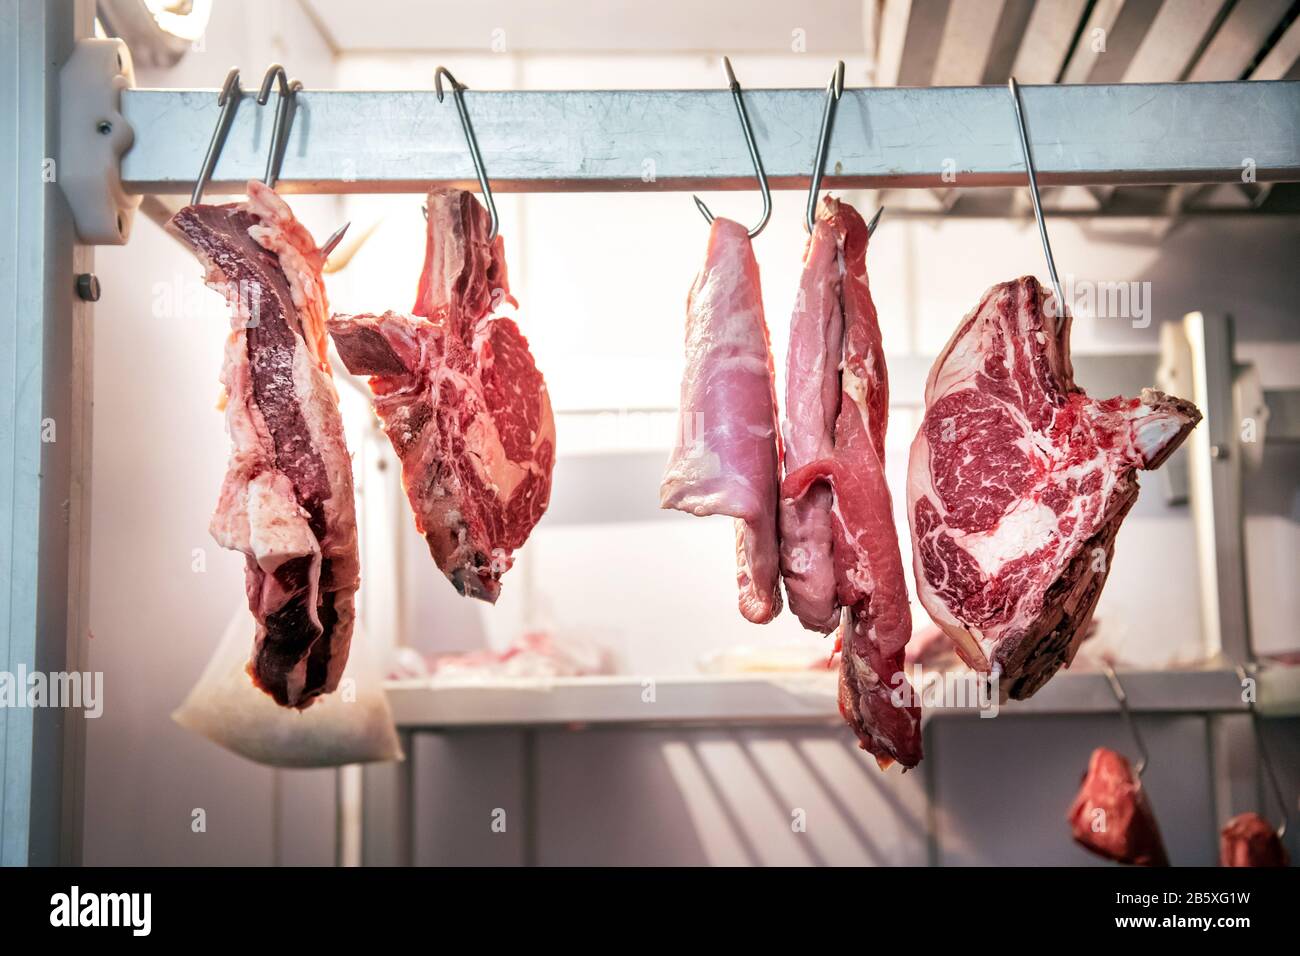 Pieces of fresh beef meet hanging on metal hooks in butchery refrigerator room, viewed from low angle Stock Photo